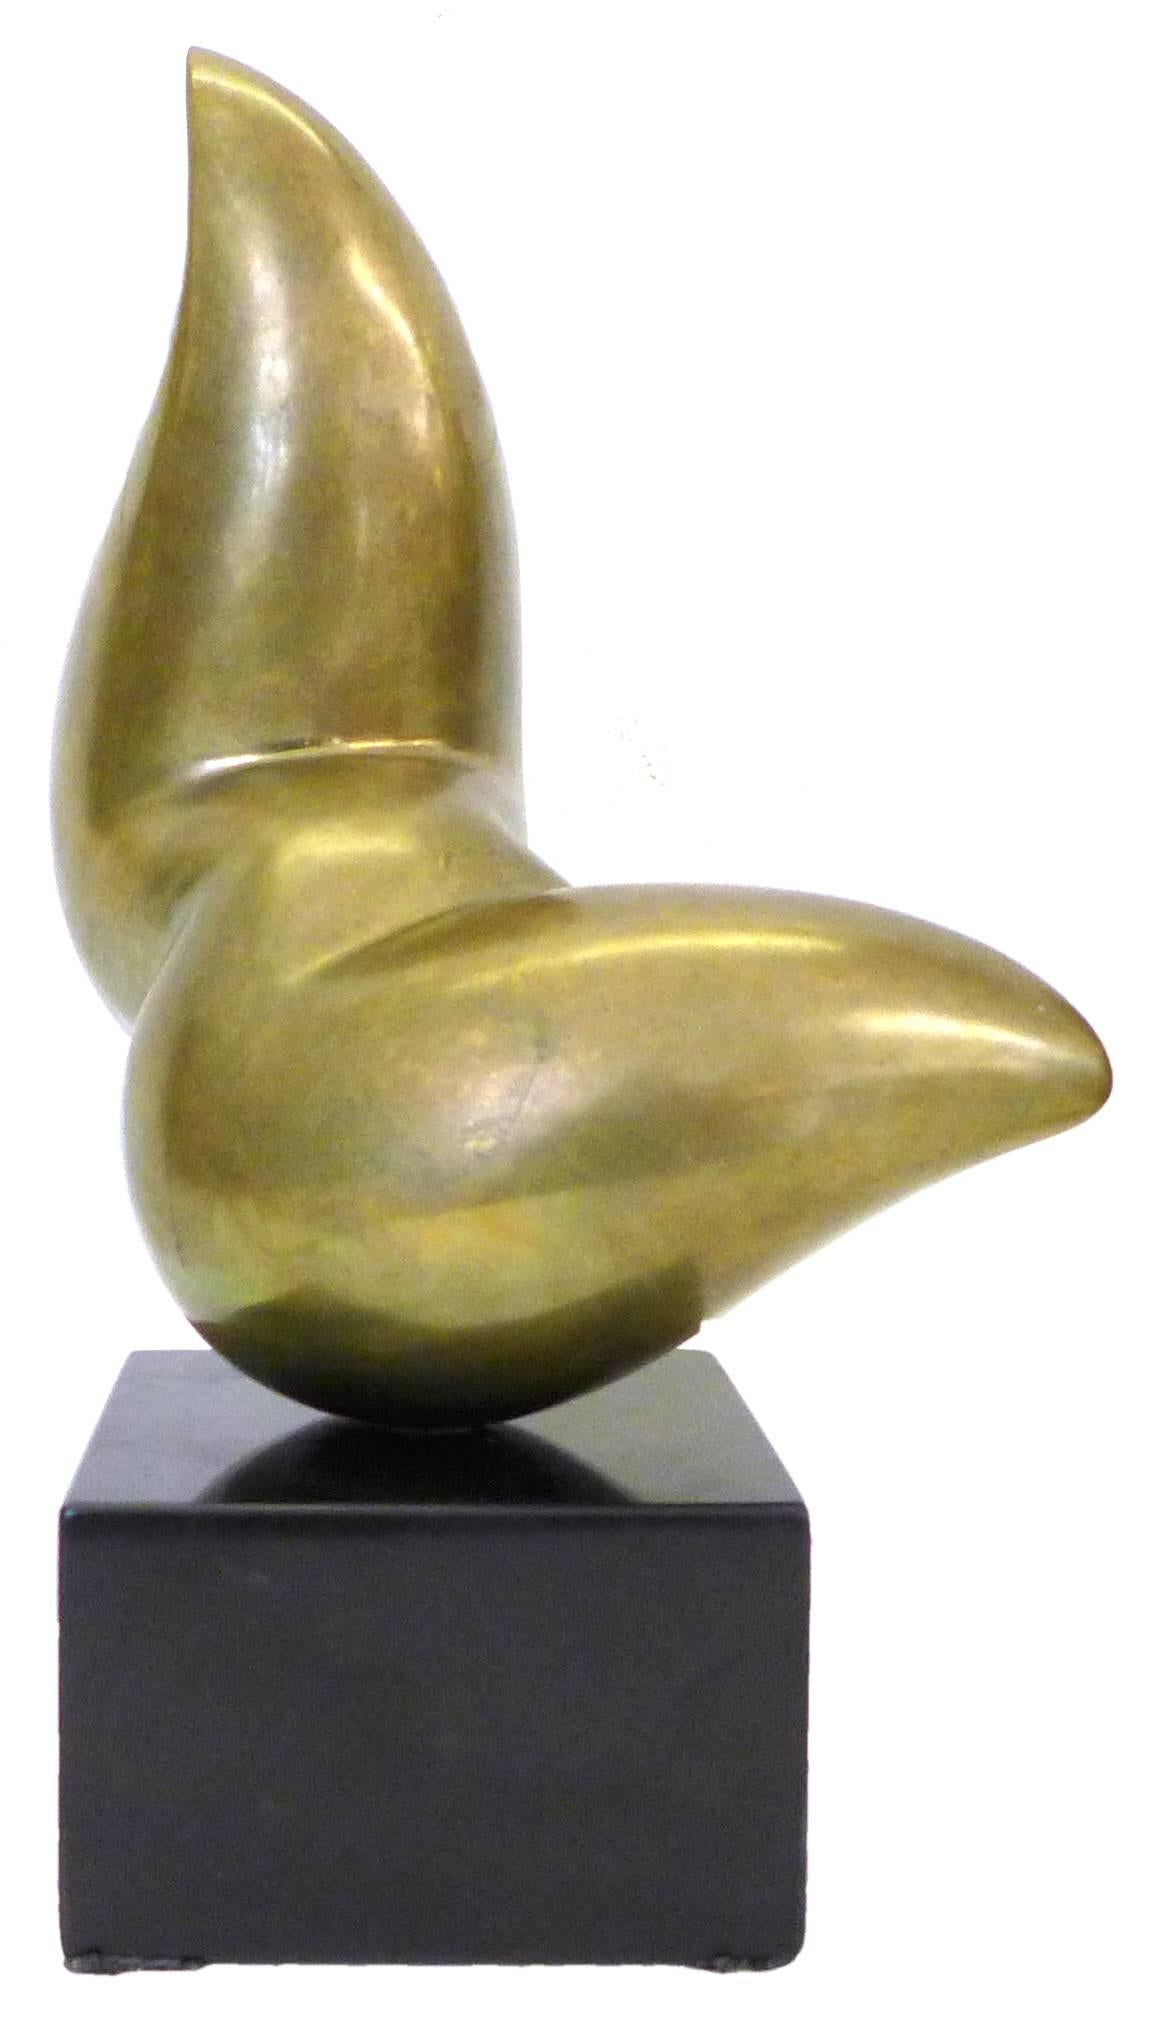 A wonderful, biomorphic, solid bronze sculpture.  A playful and elegant, fluid-like figure beautifully balanced, mounted to its original base, seemingly leaping upward.  An alluring creation, replete with fantastic, continuous lines and folds; great